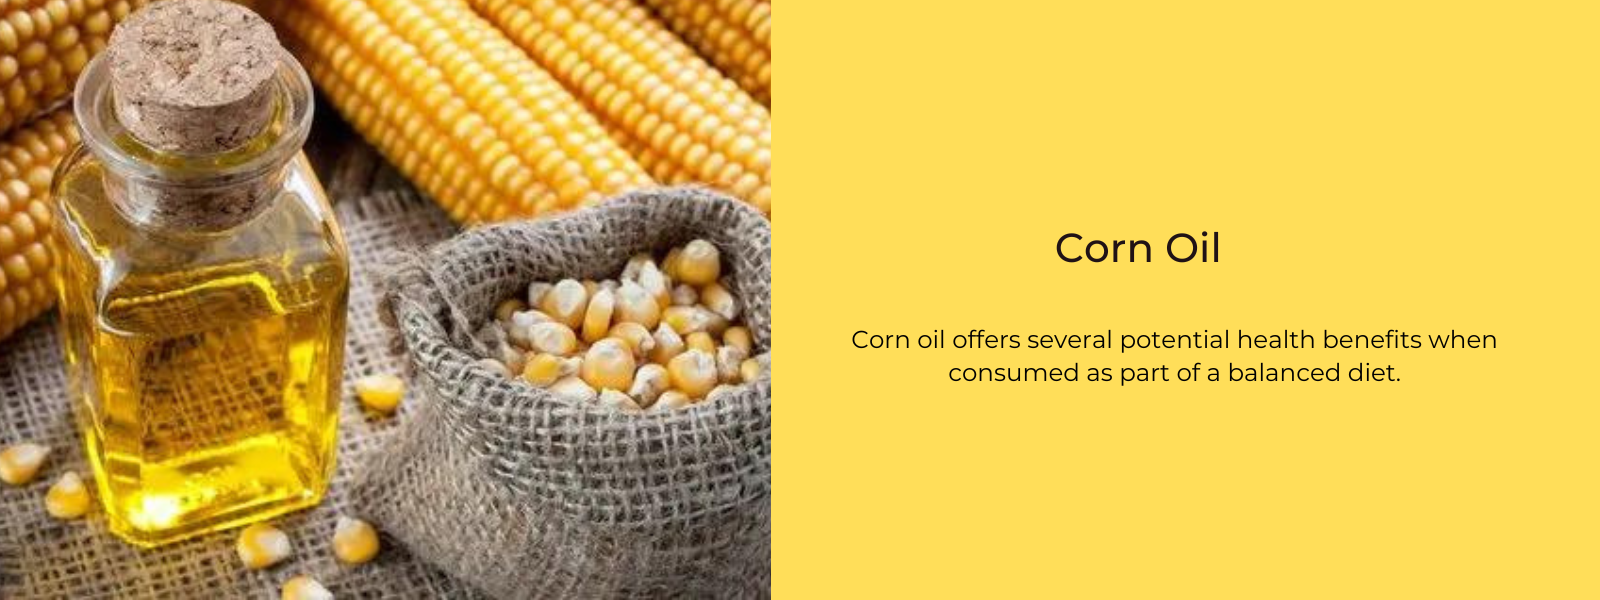 Corn Oil - Health Benefits, Uses and Important Facts